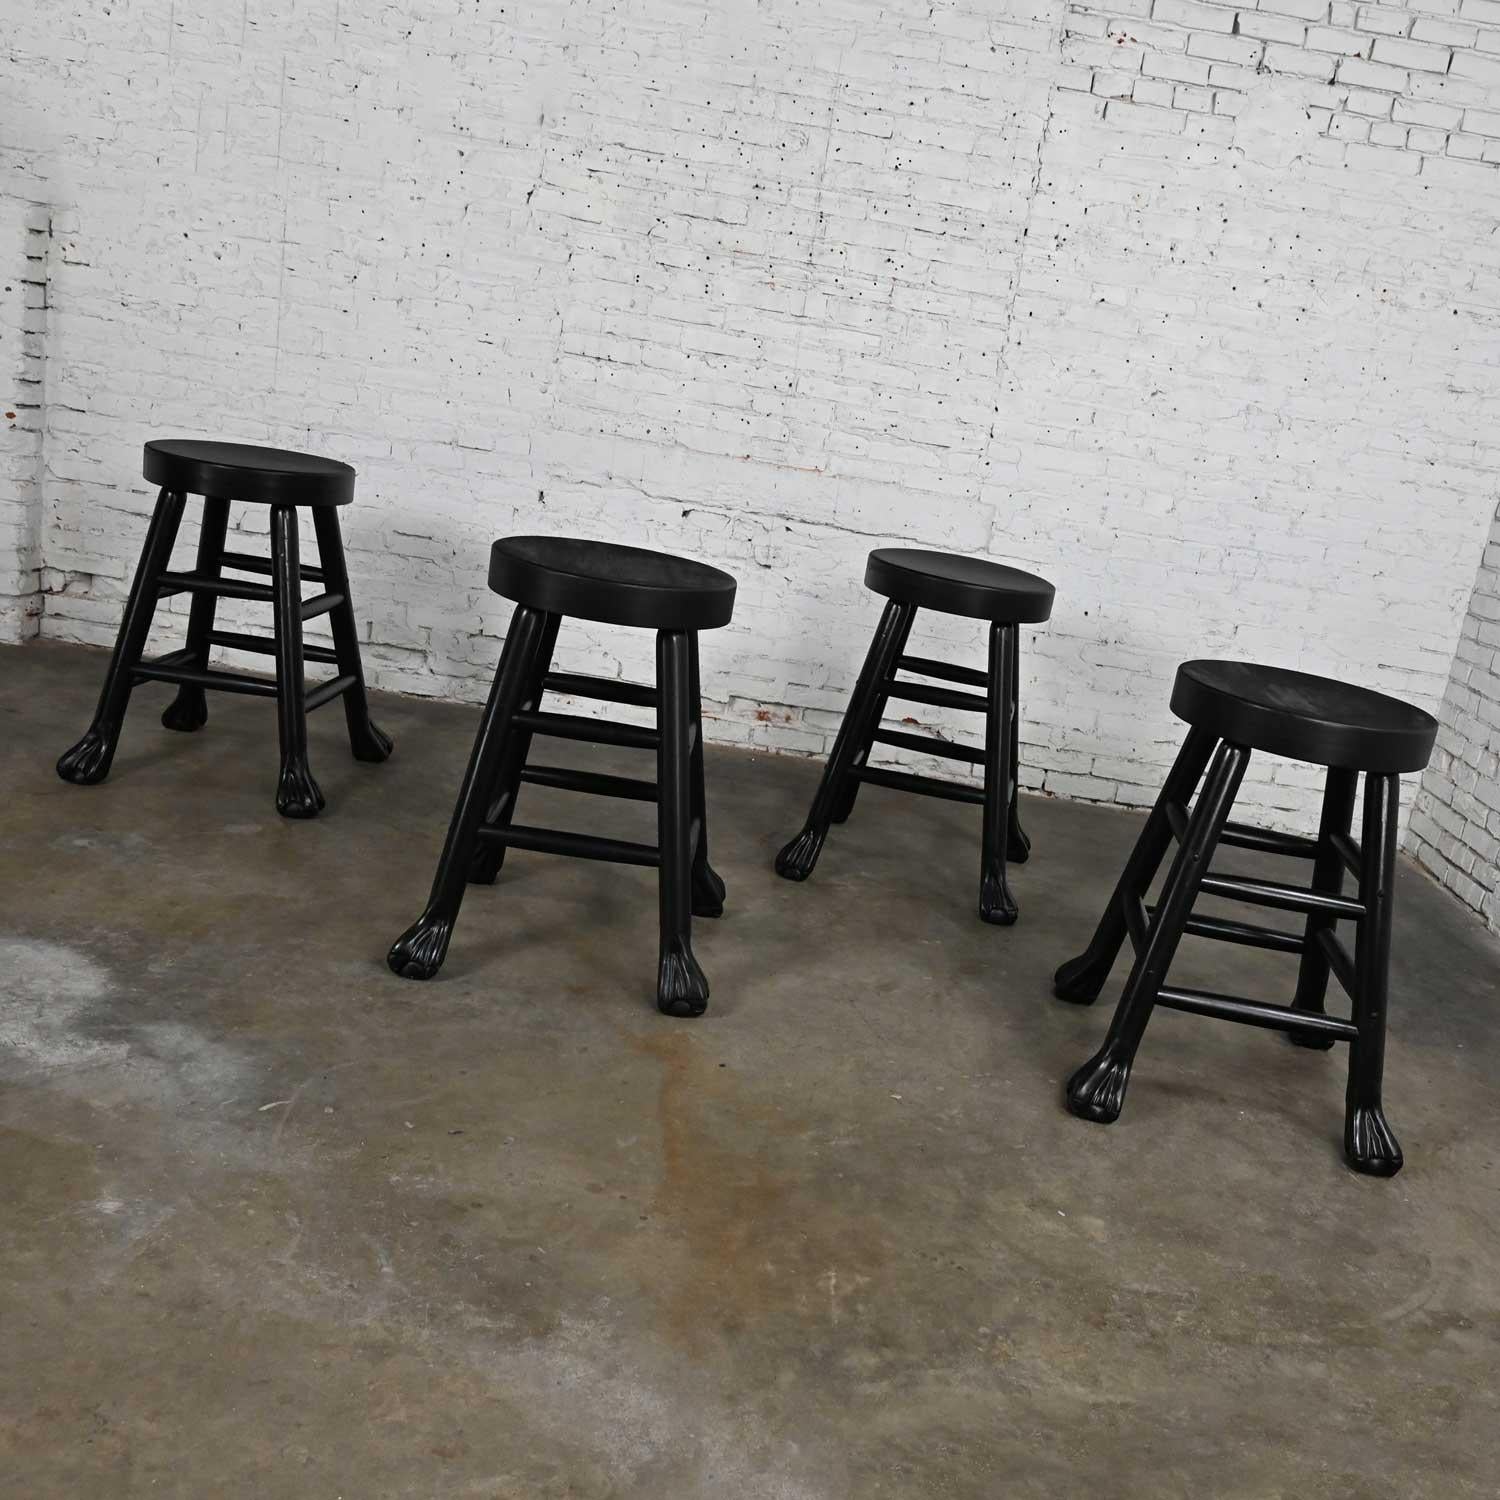 Vintage Rustic Blackened Solid Hardwood Chunky Claw Foot Barstools Set of 4 For Sale 1